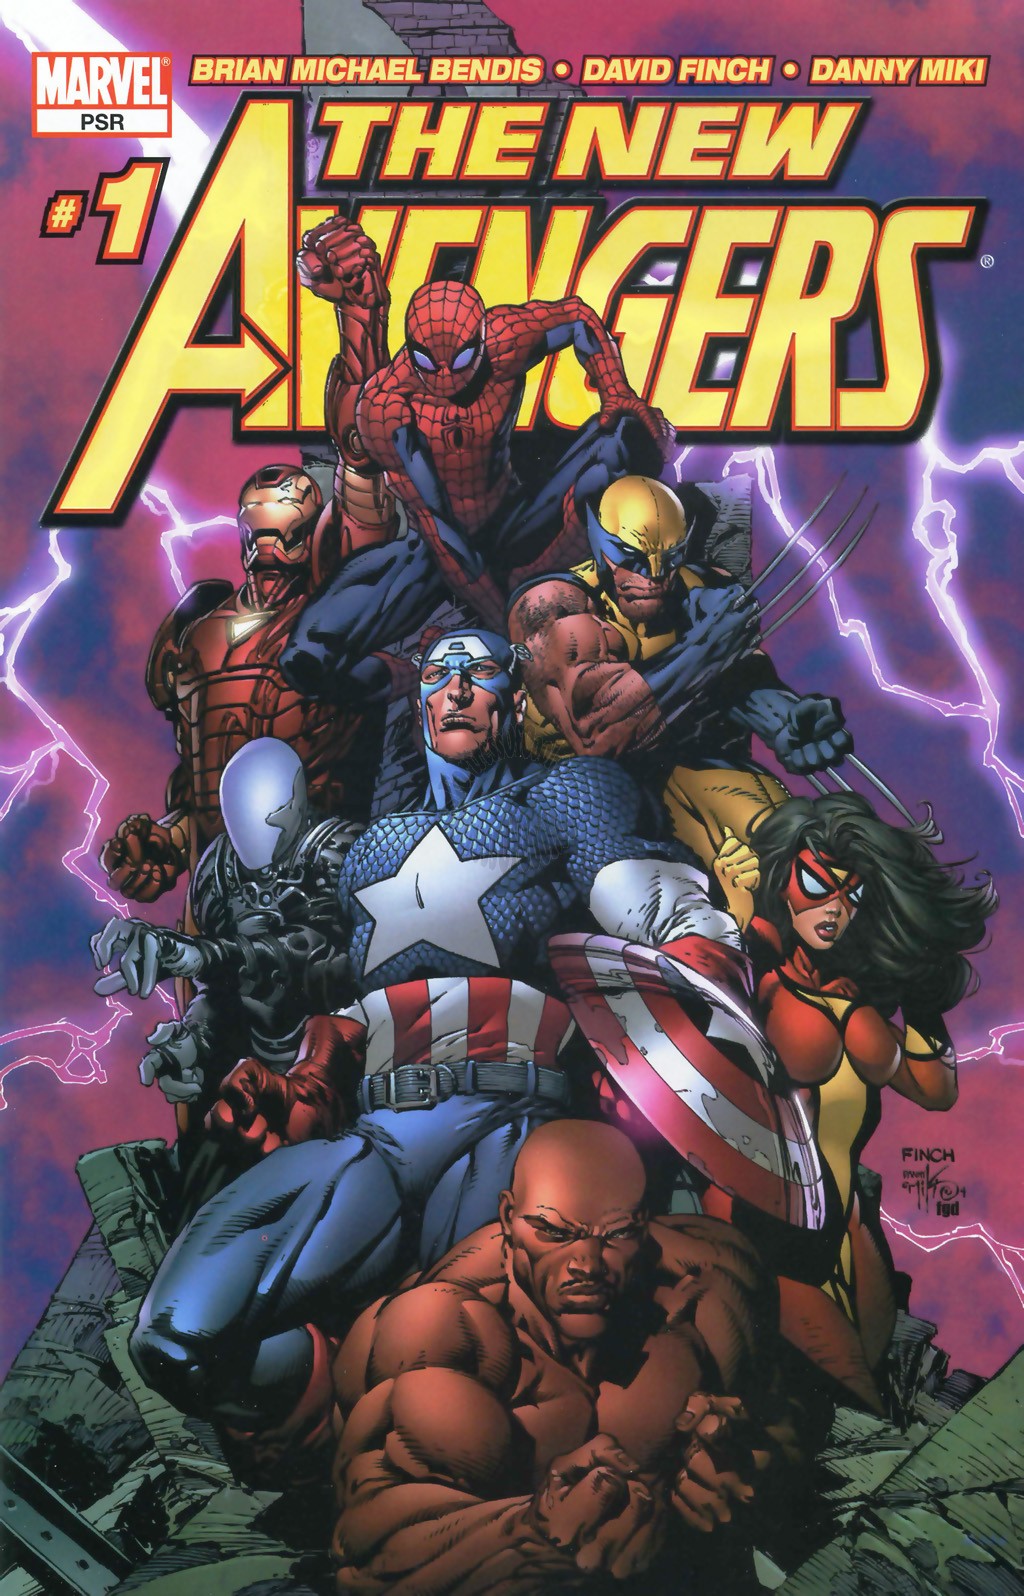 THE NEW AVENGERS #1 2ND PRINT VARIANT EDITIION